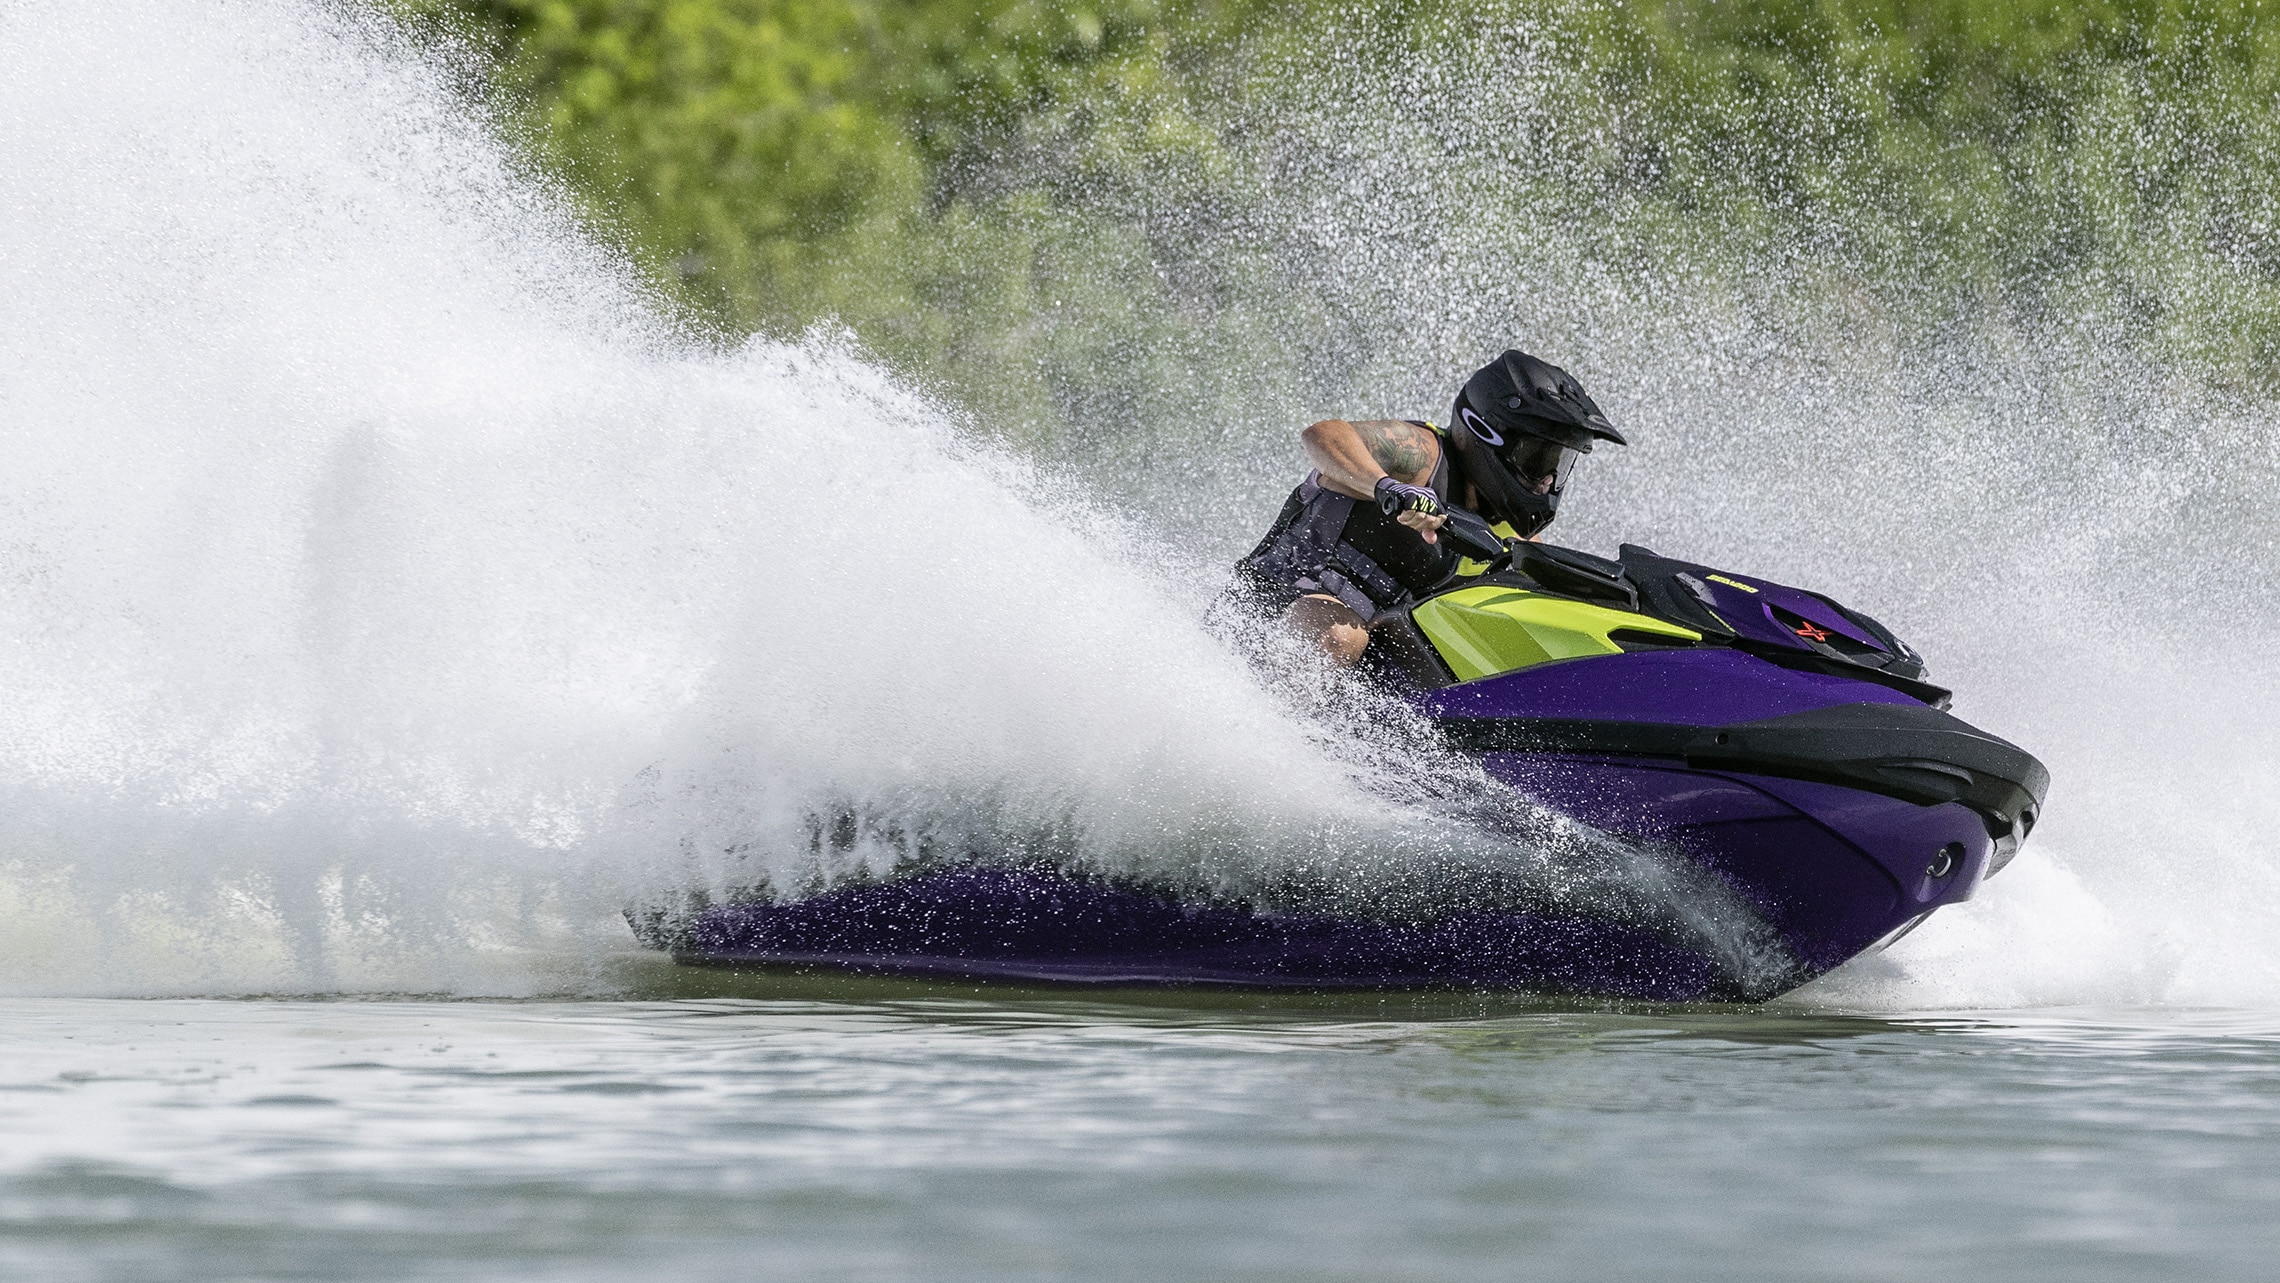 rider on a Sea-Doo RXP-X watercraft with innovative hull